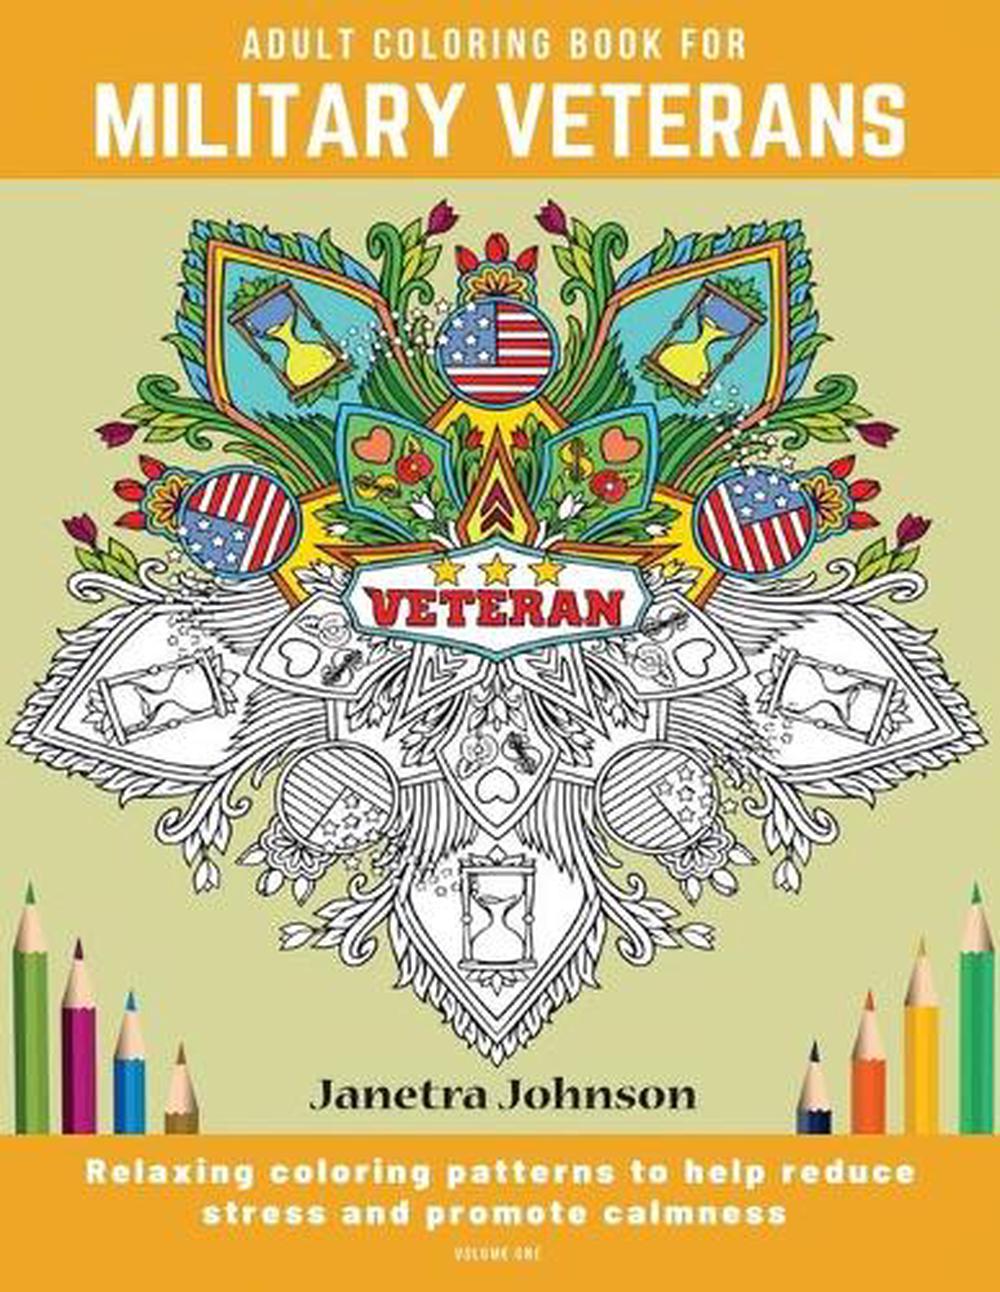 Download Adult Coloring Book For Military Veterans By Janetra Johnson English Novelty B 9781735246703 Ebay